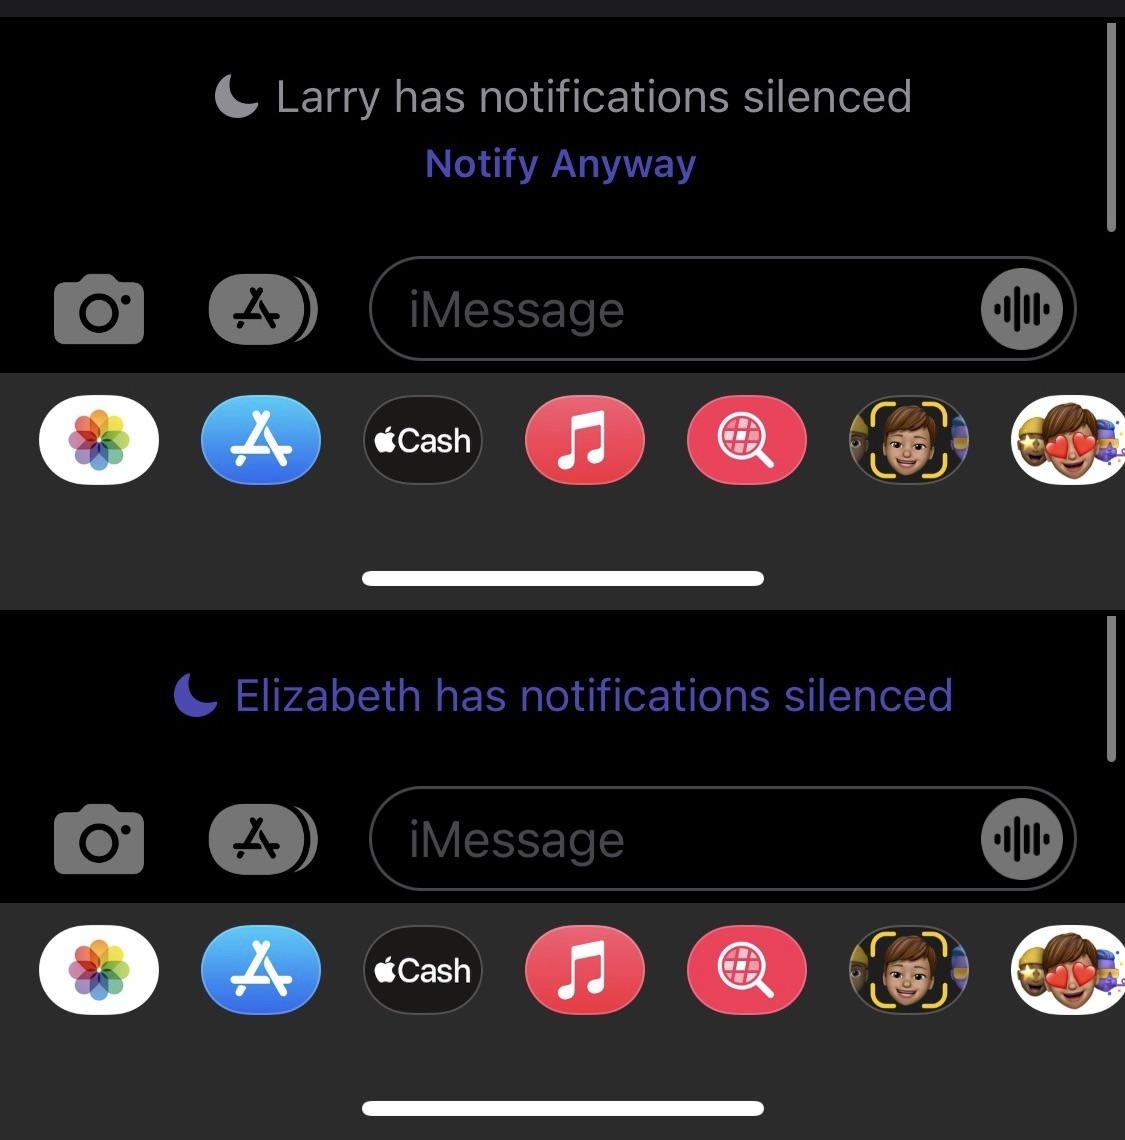 Screen showing silenced notification alerts for contacts &#x27;Larry&#x27; and &#x27;Elizabeth&#x27; with various app icons